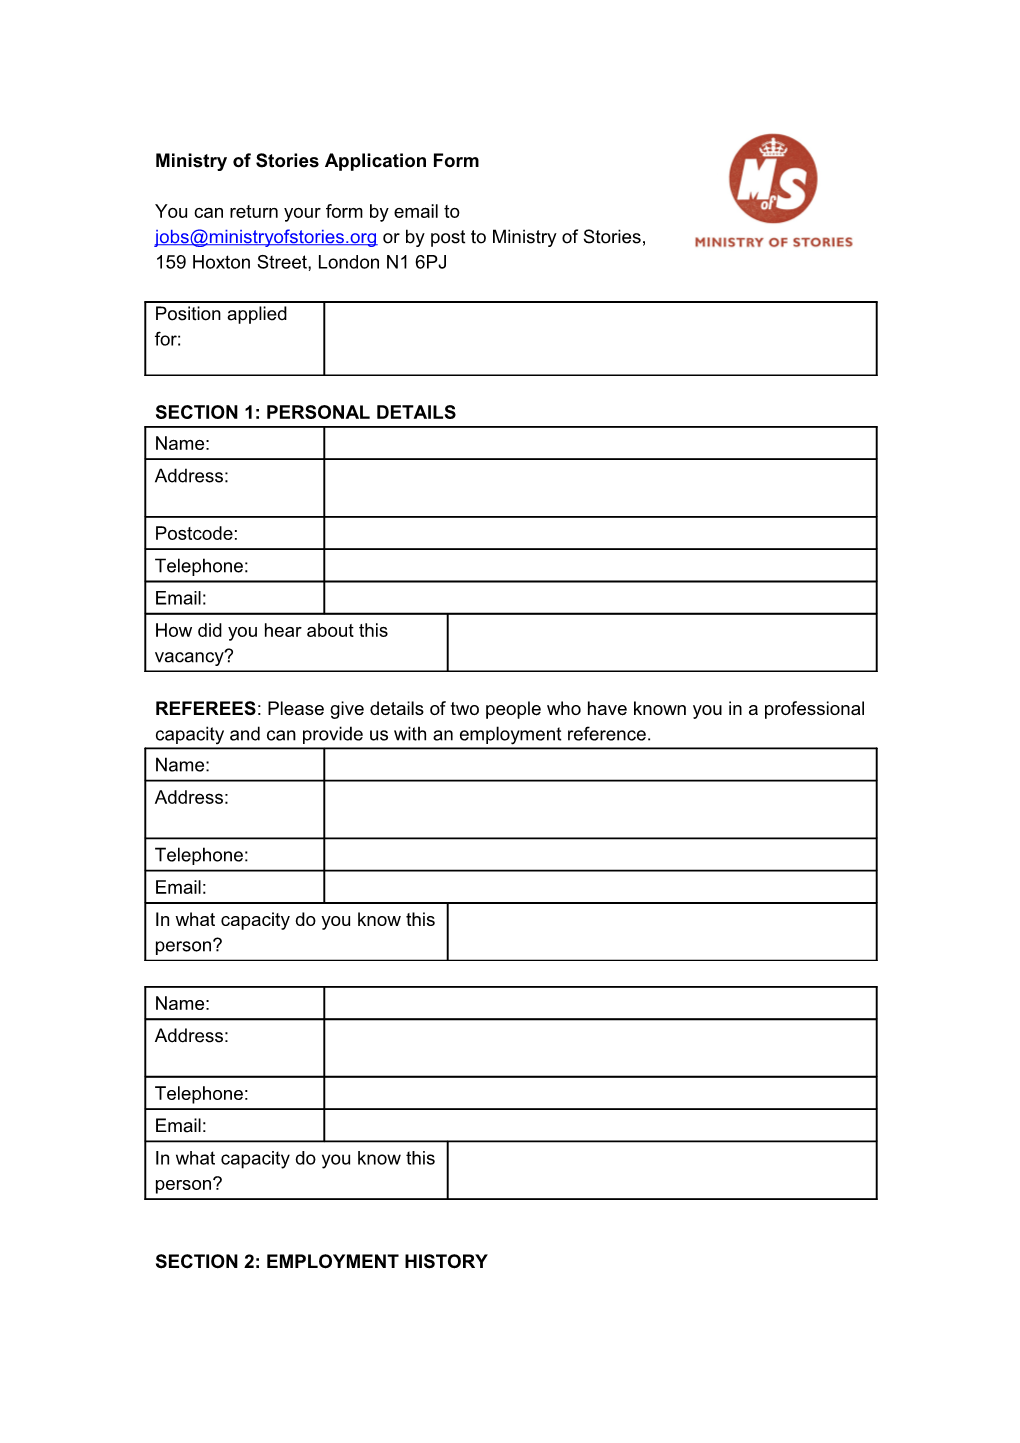 Ministry of Stories Application Form